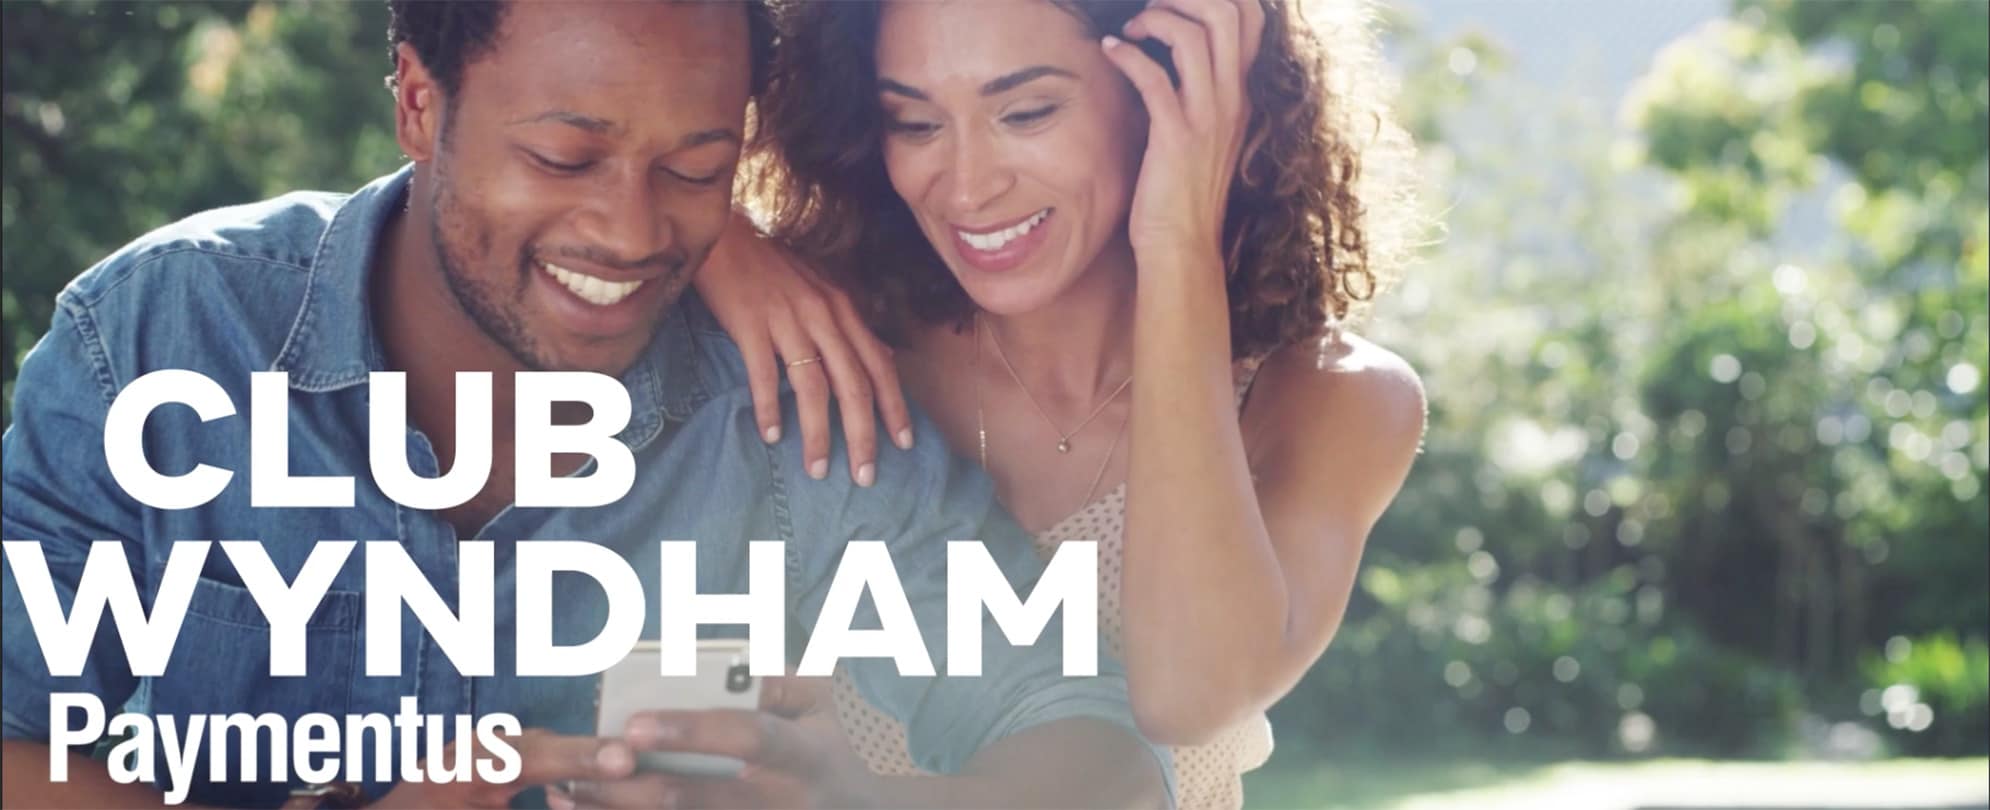 A woman looks over her husband's shoulder as they both smile looking at his cell phone with the Club Wyndham and Paymentus logos overlayed on the image.